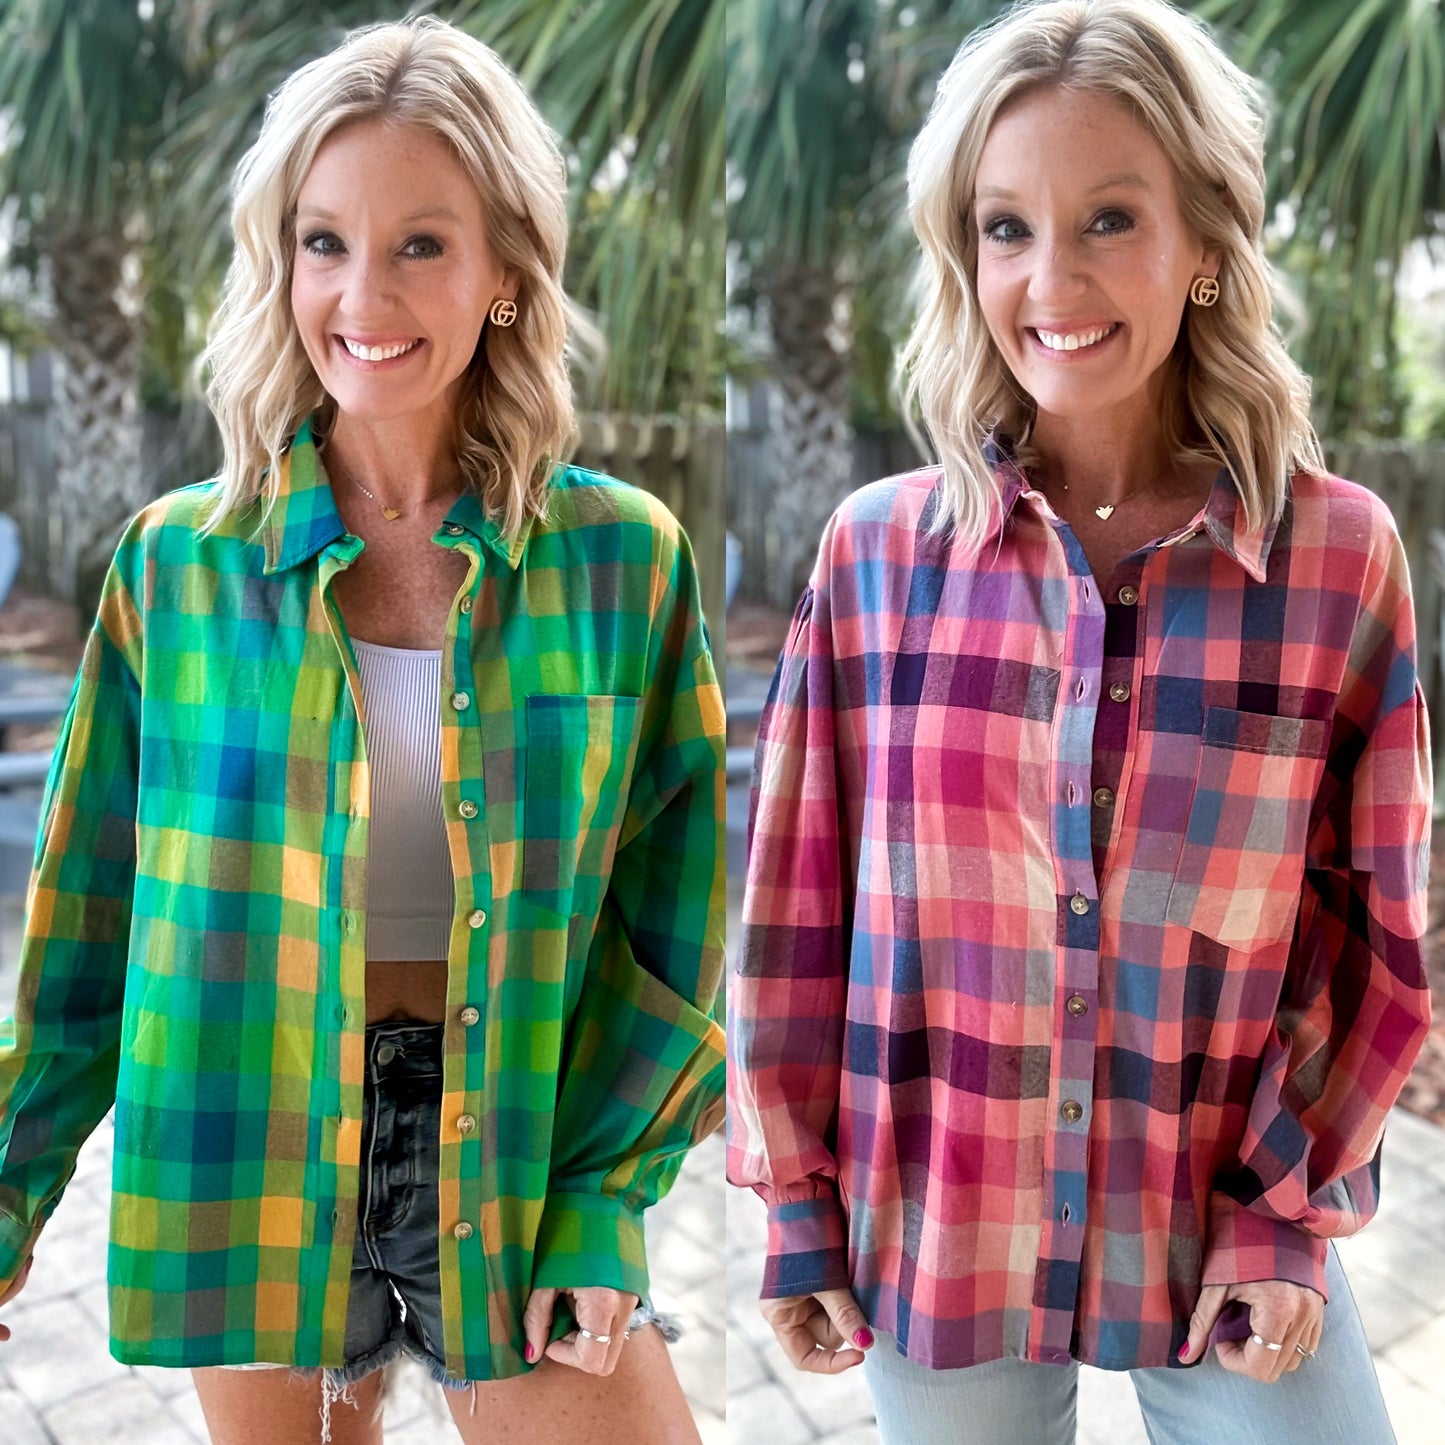 The Zoe Washed Plaid Top